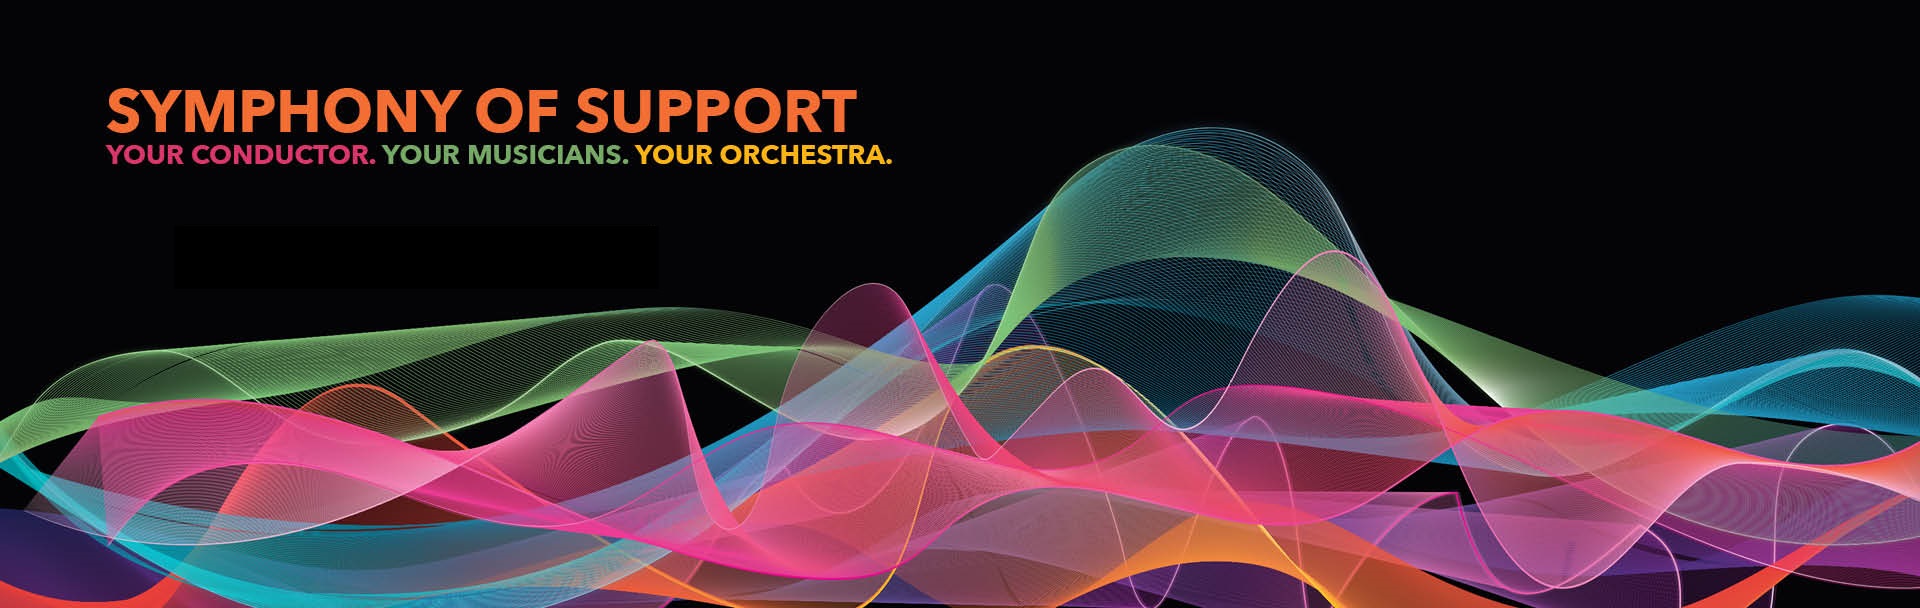 Symphony of Support: Your Conductor, Your Musicians, Your Orchestra